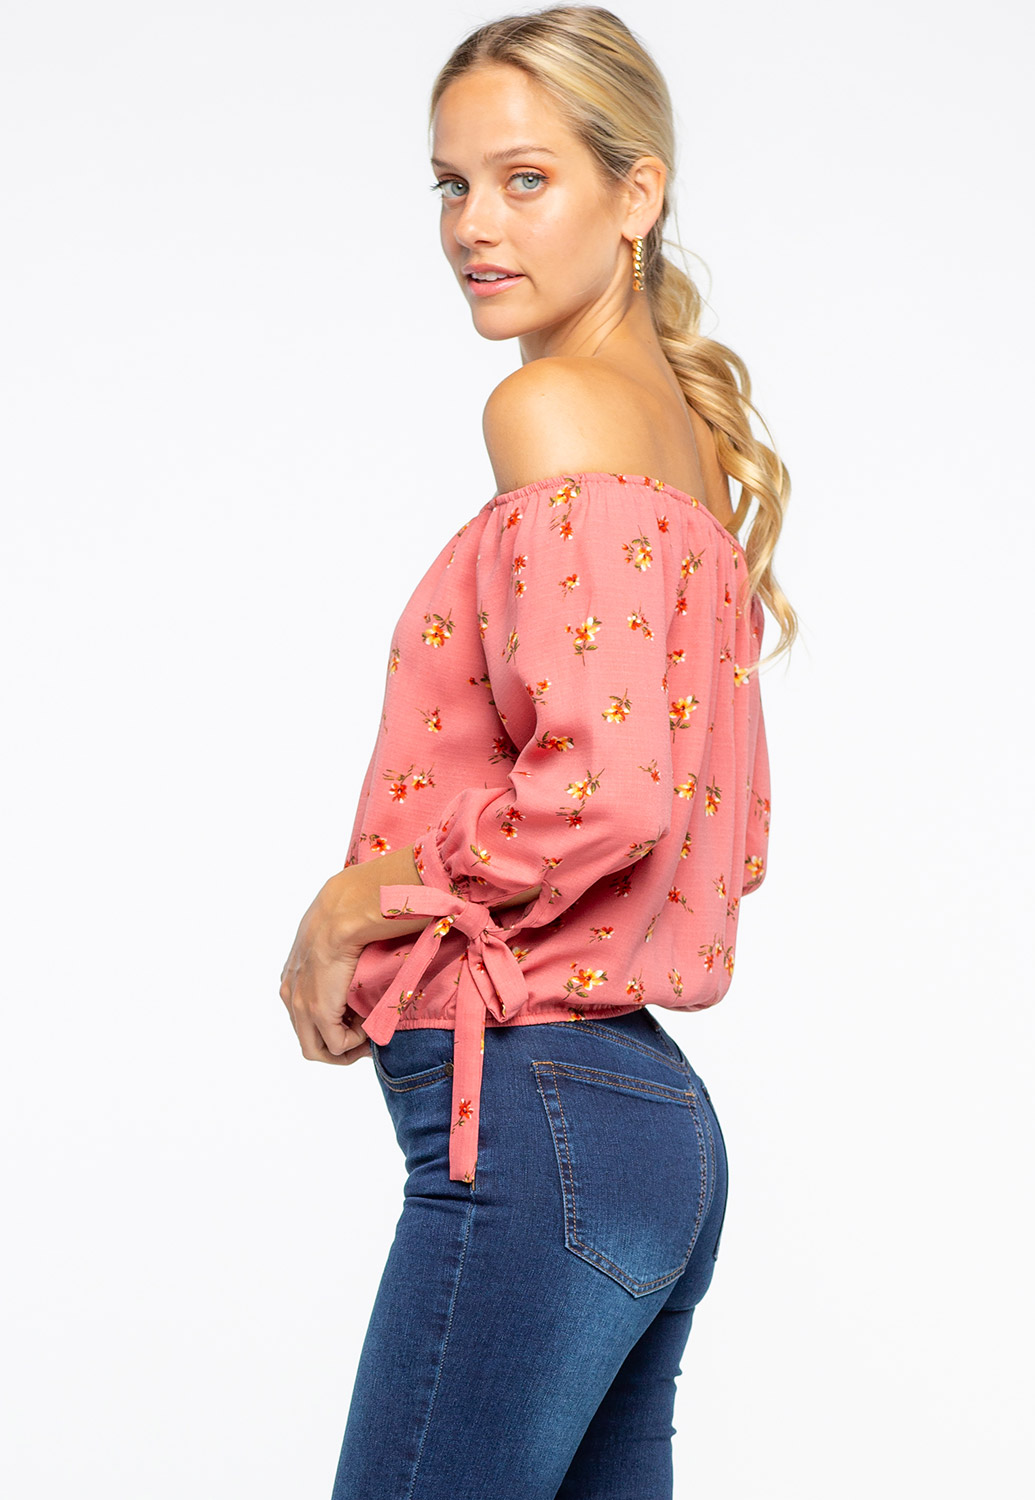 Off The Shoulder Floral Printed Top With Wrist Tie Detail 